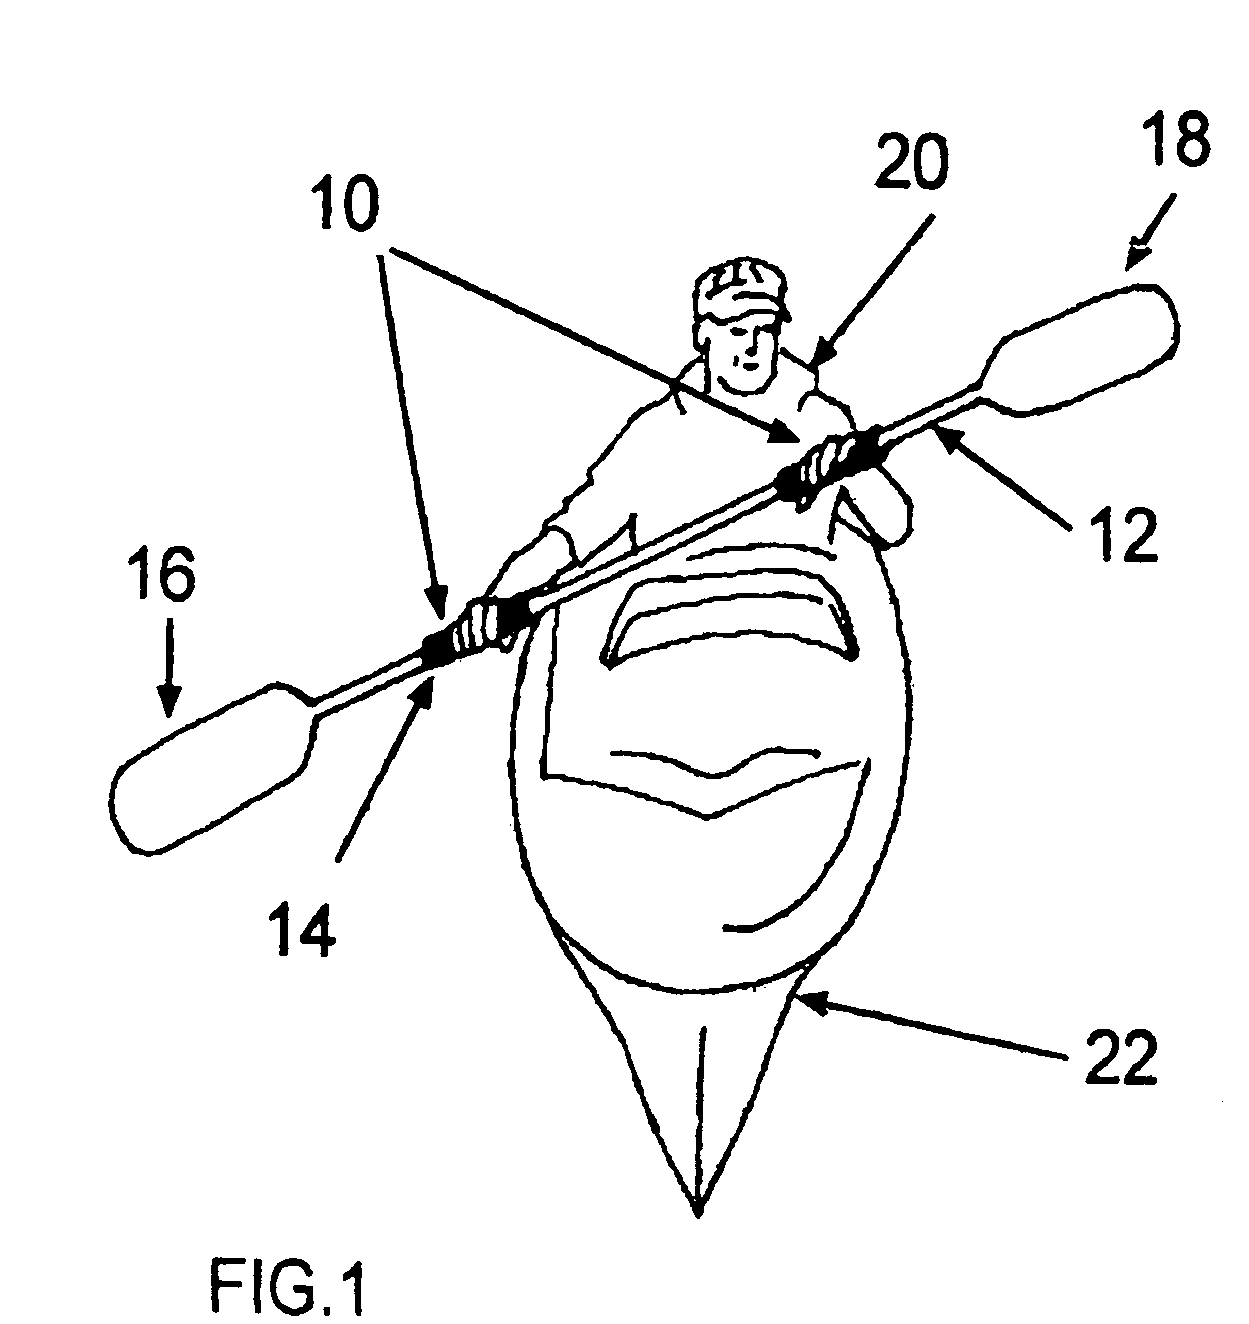 Paddle hand grips and method for making and using same